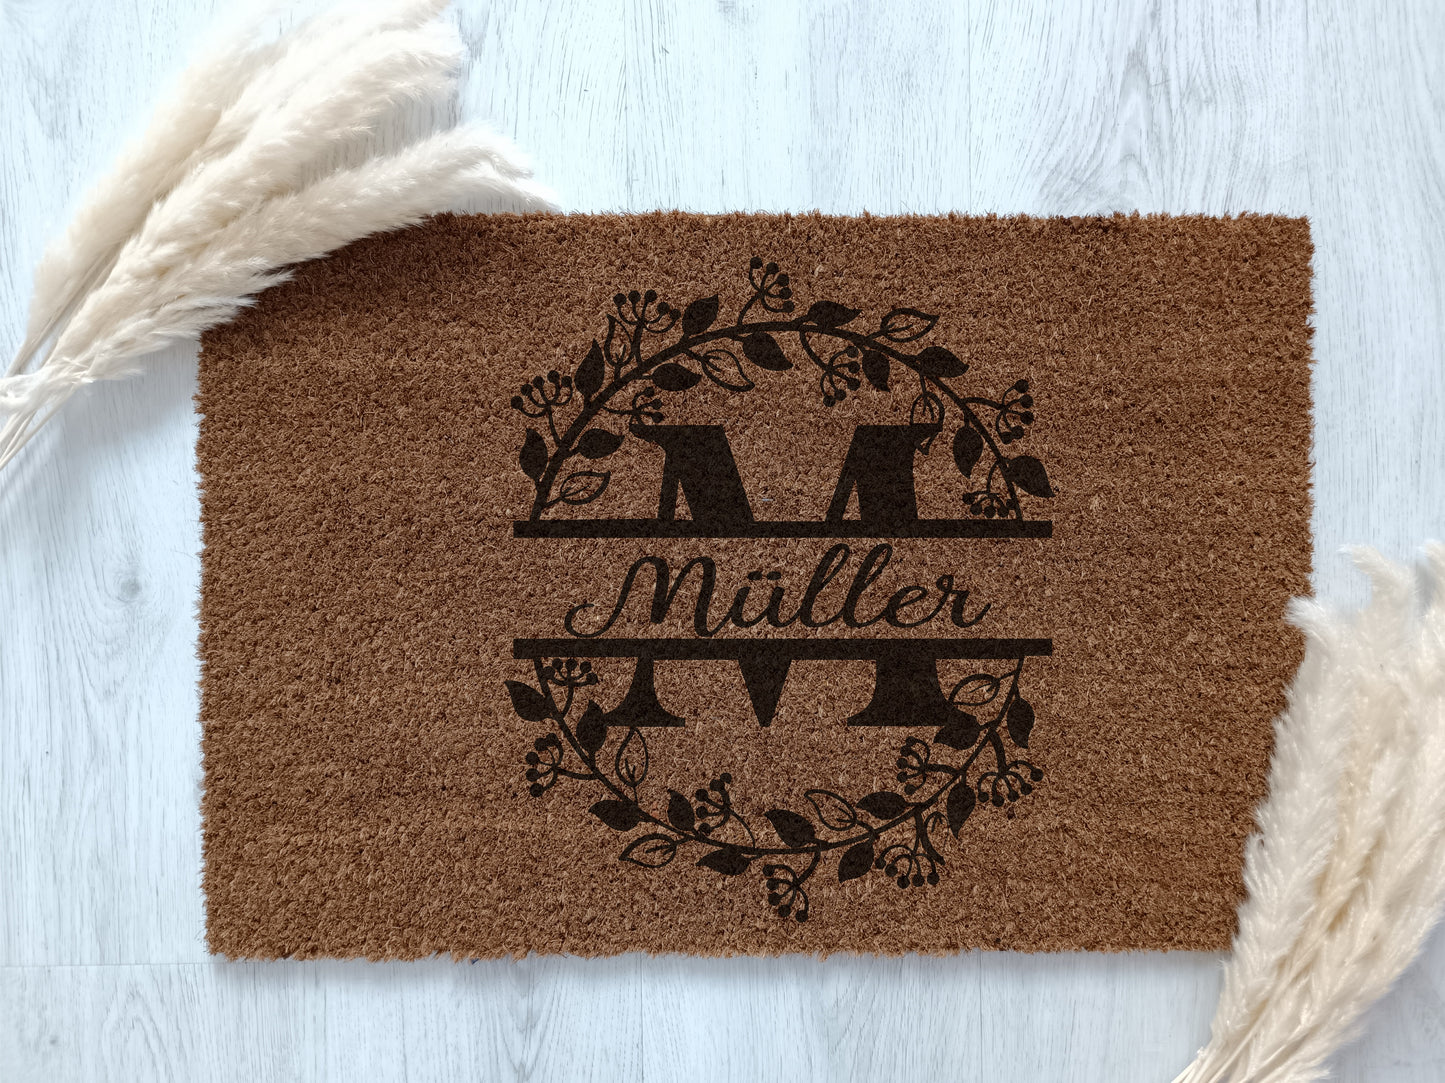 Personalized doormat with your name as a monogram made of coconut